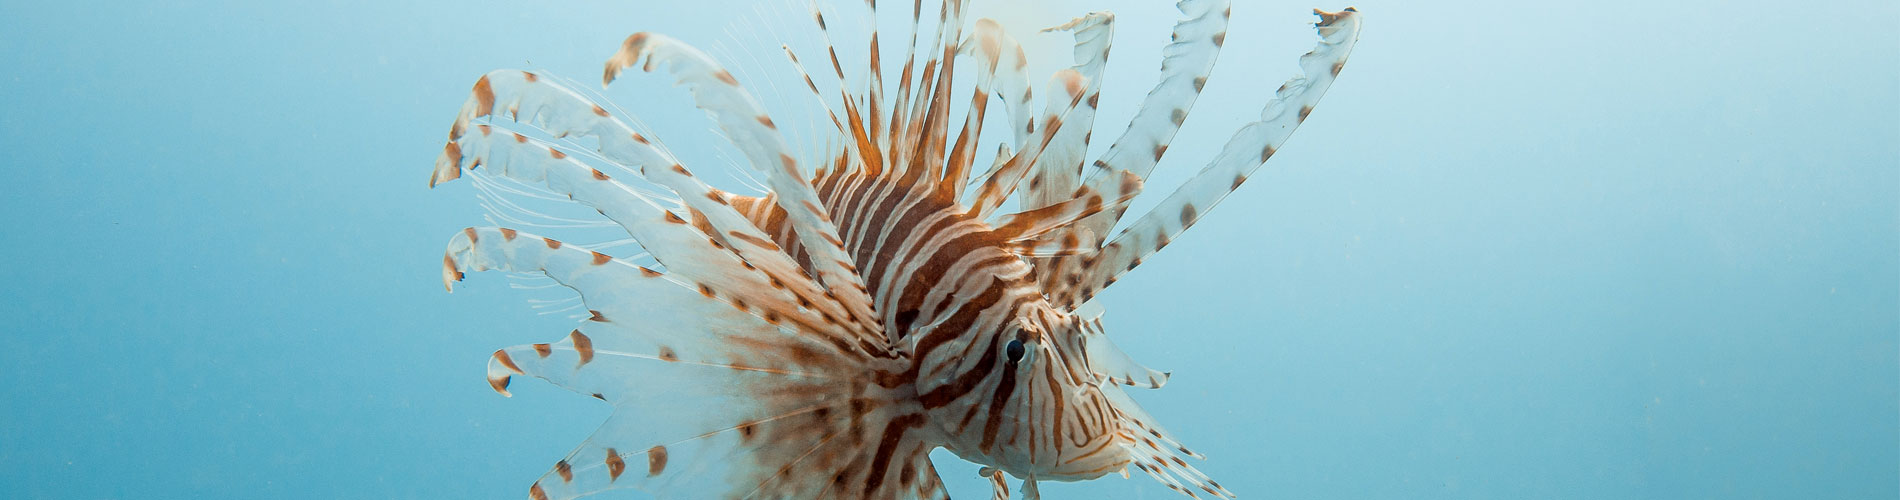 Wishes for Fishes - Lionfish